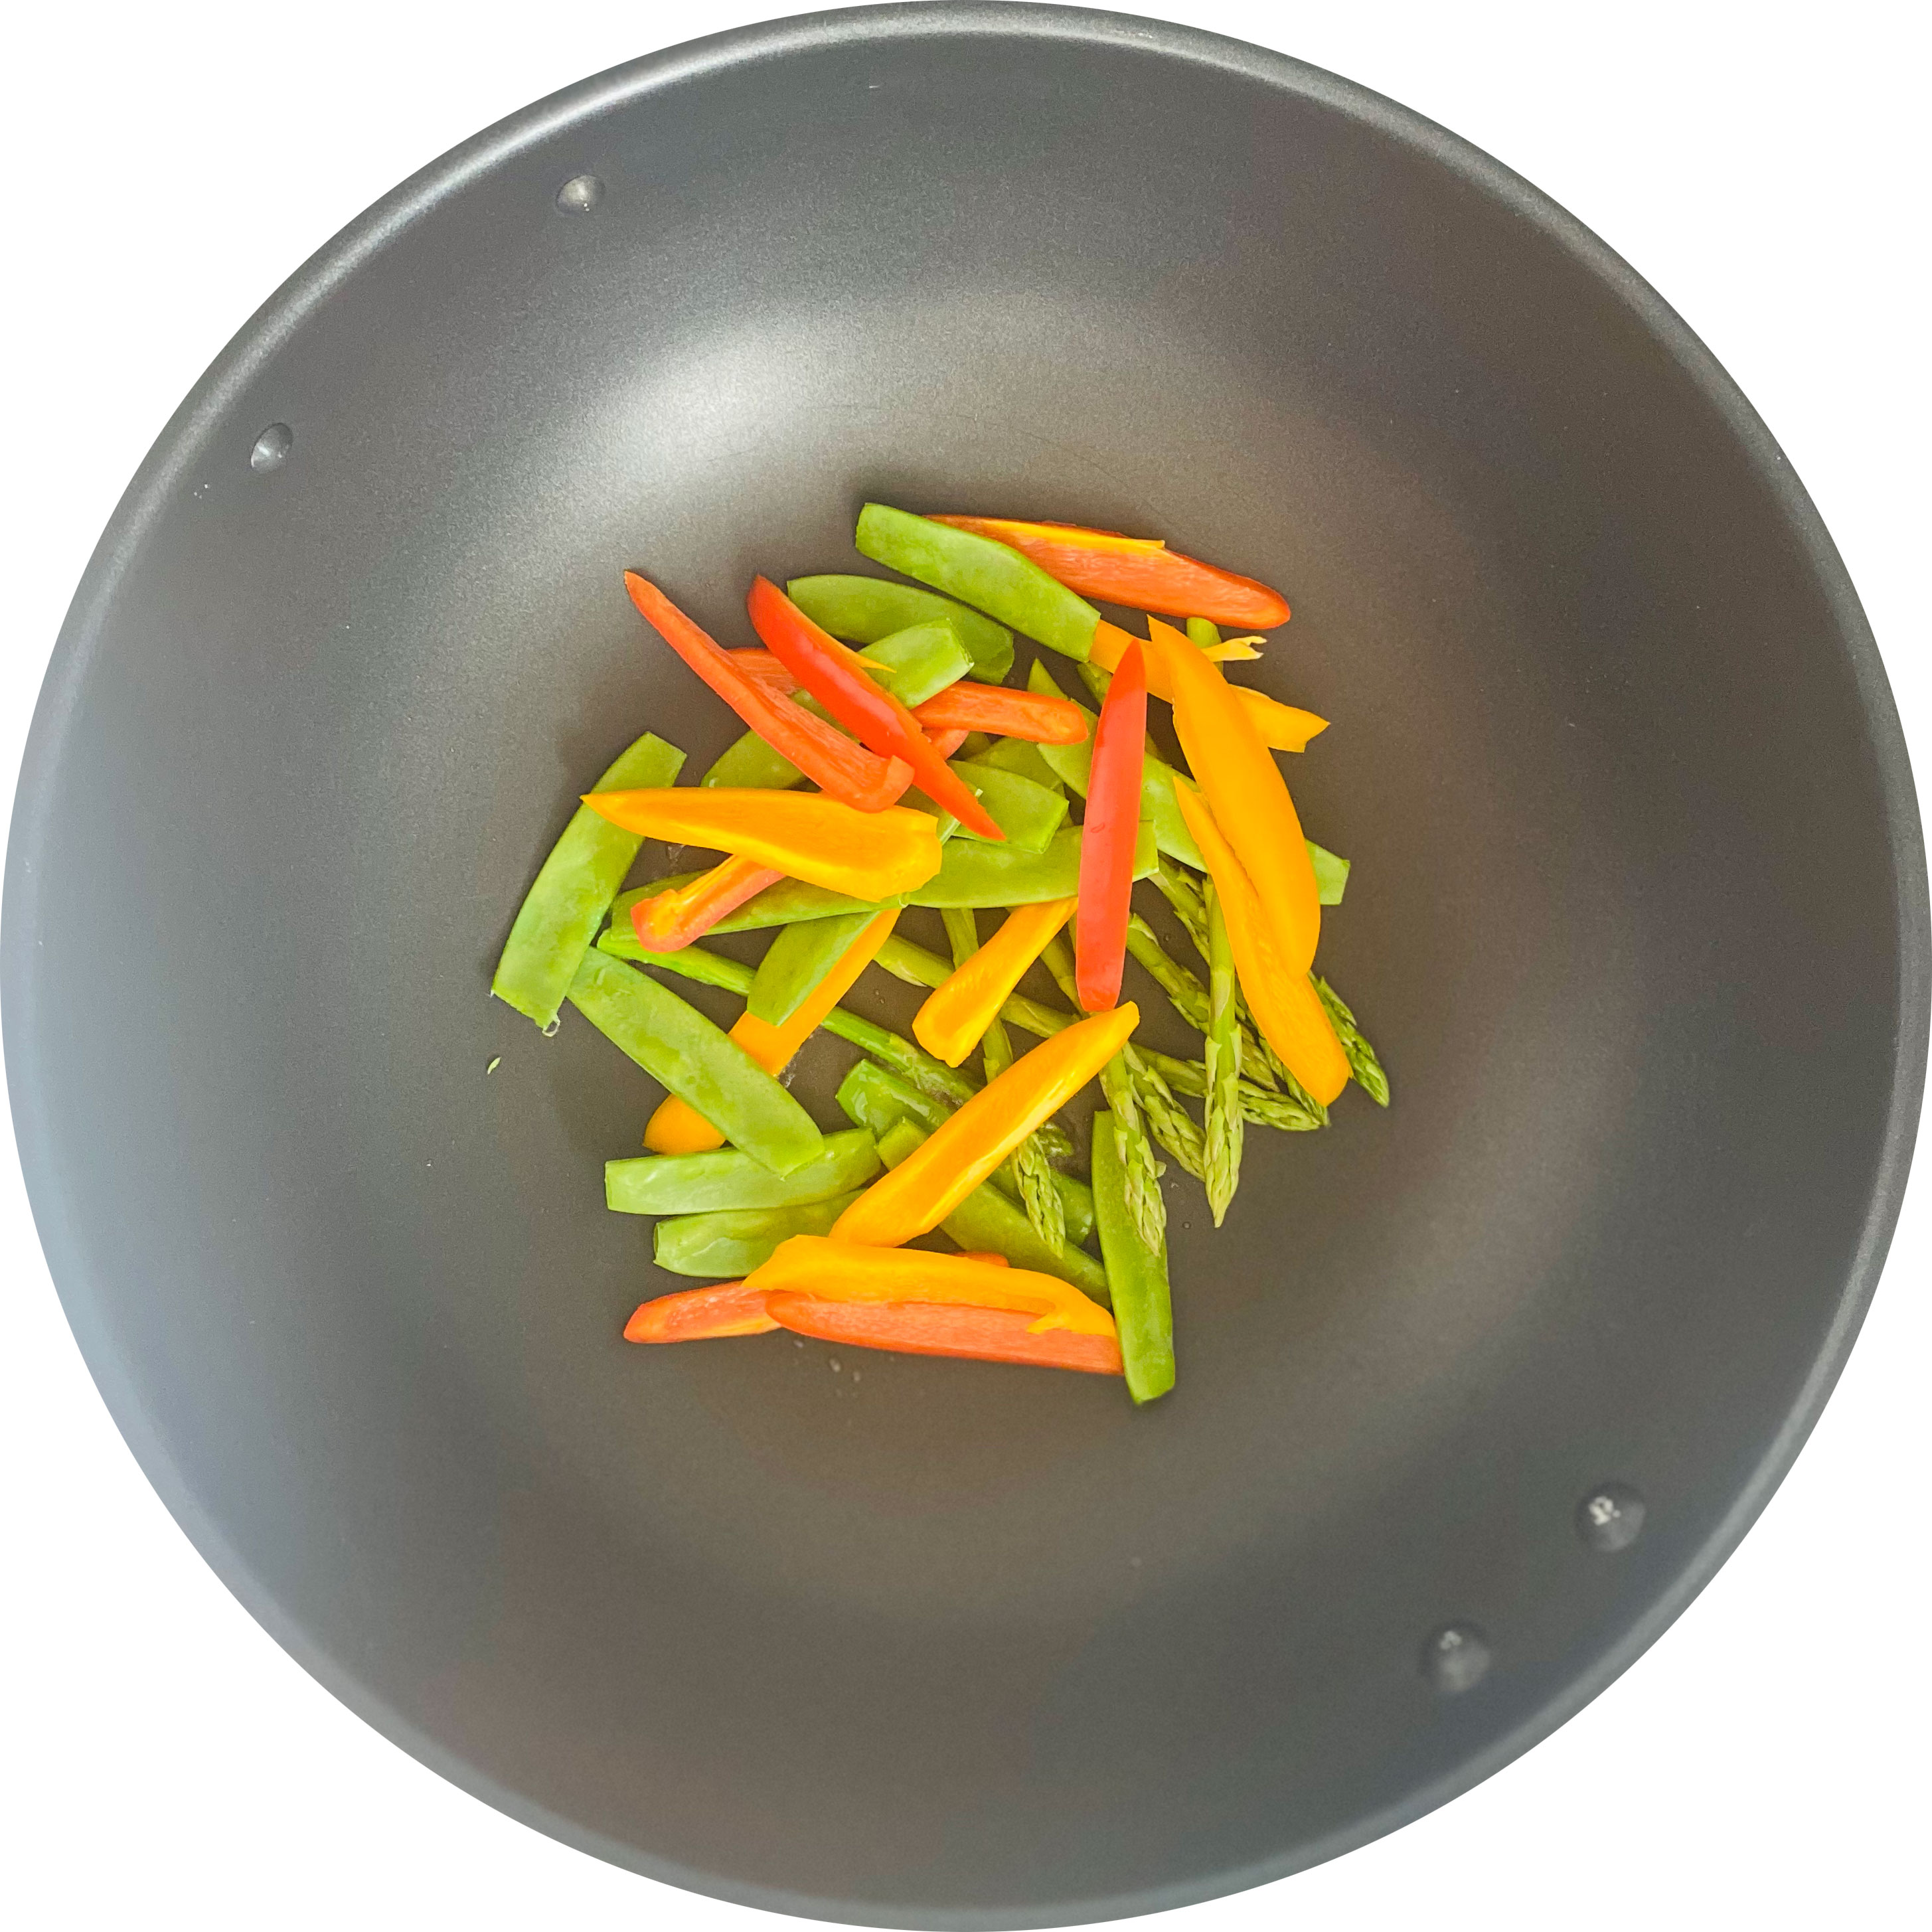 In a wok sauté the bell peppers, baby asparagus and sugar snap peas.